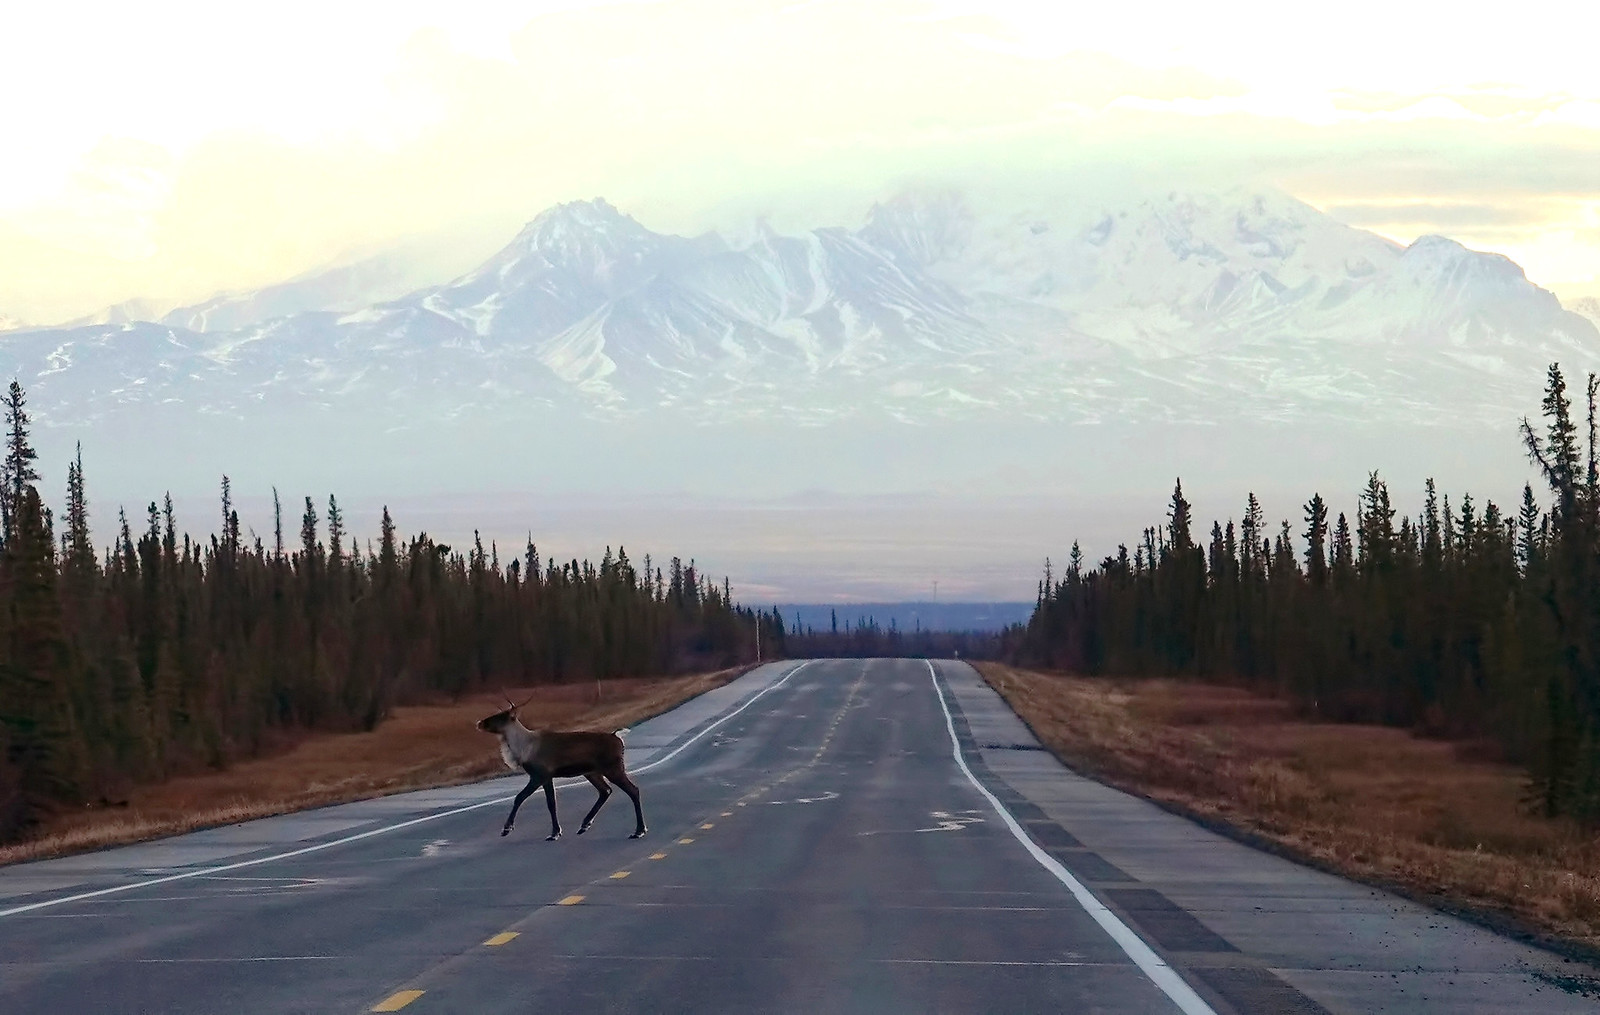 An Elk traipses across an open highway surrounded by mountains and trees